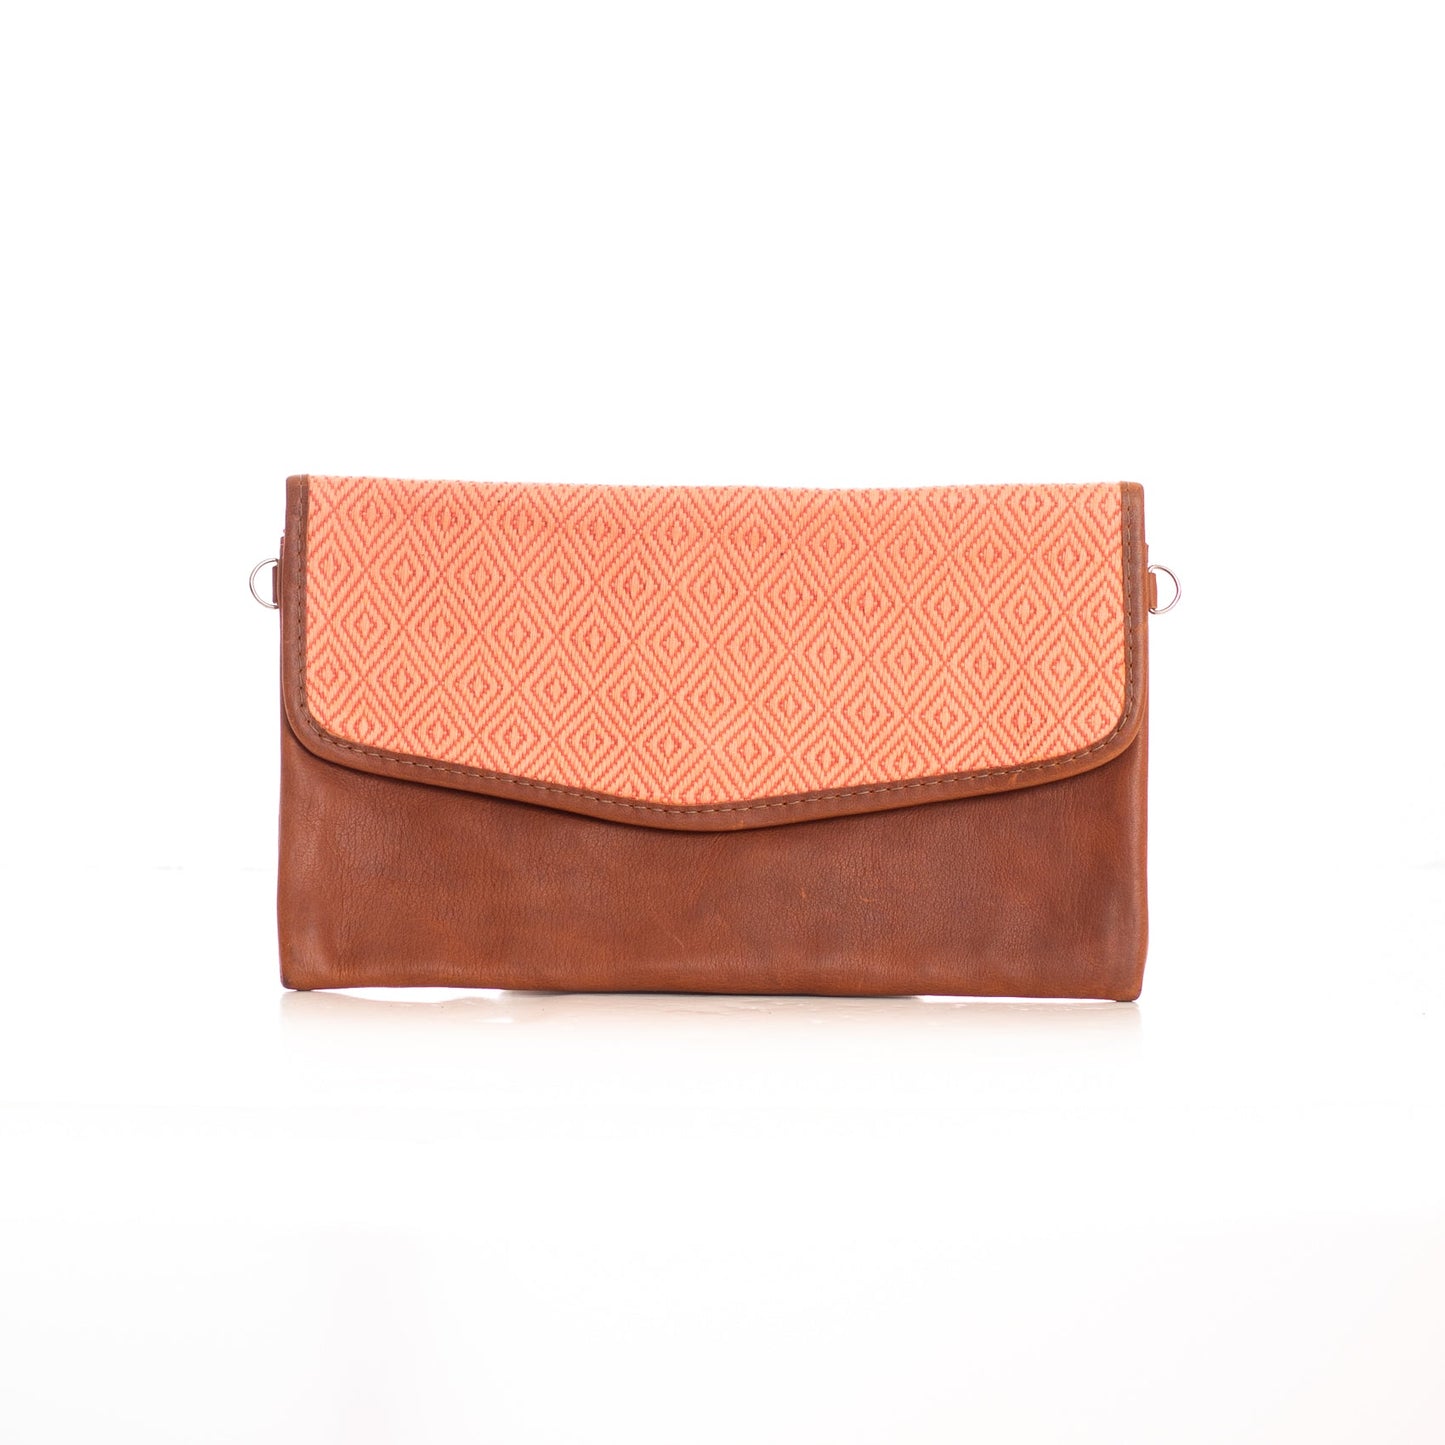 ARCHIVE SALE - DATE NIGHT CLUTCH - CORAL SUNSET - CAFE - ITEM NO. 26522